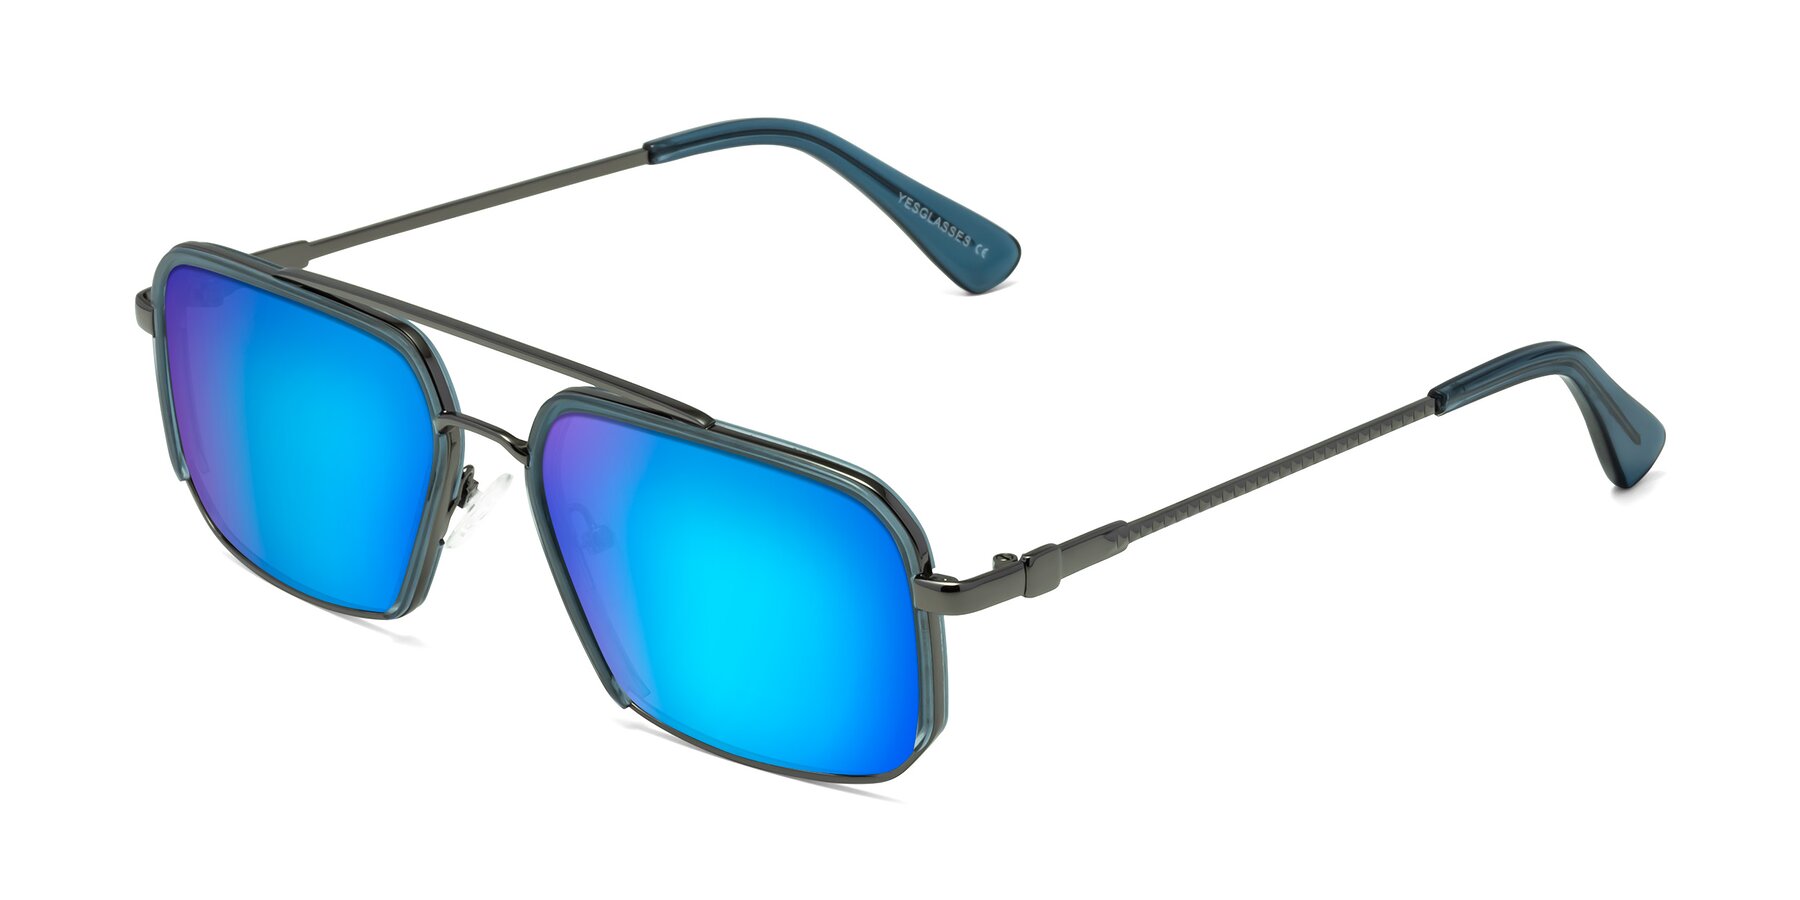 Angle of Dechter in Teal-Gunmetal with Blue Mirrored Lenses